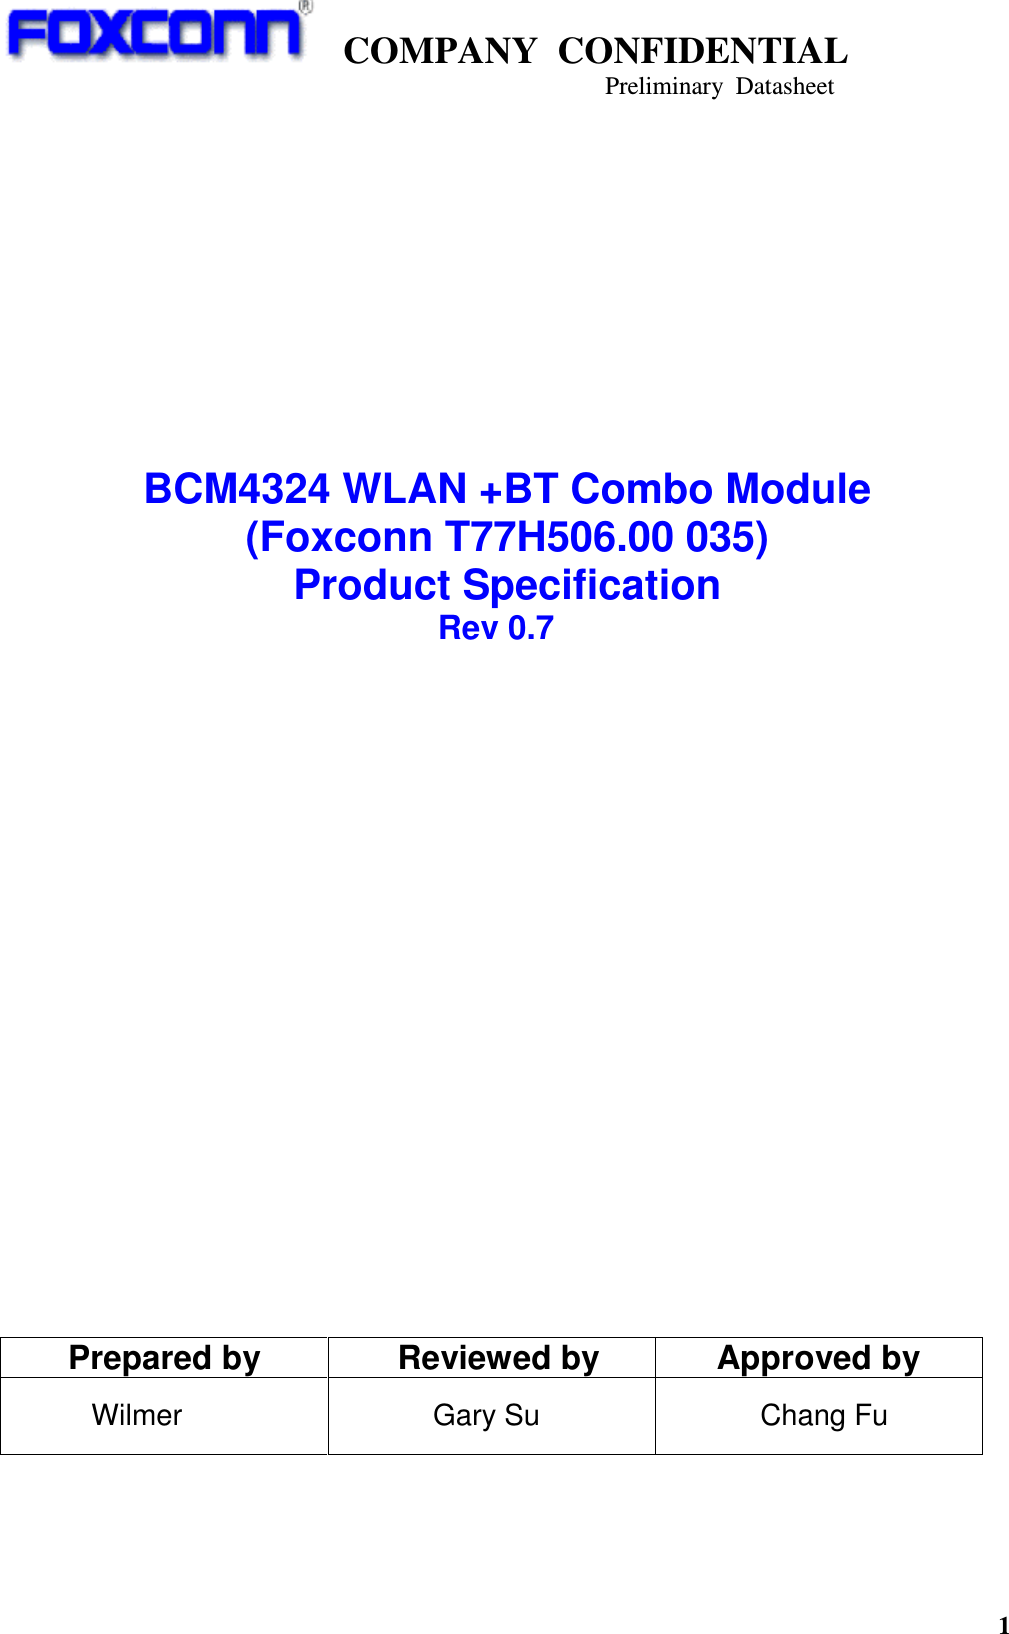    COMPANY  CONFIDENTIAL                                                                     Preliminary  Datasheet 1             BCM4324 WLAN +BT Combo Module (Foxconn T77H506.00 035) Product Specification                                                     Rev 0.7                       Prepared by  Reviewed by  Approved by             Wilmer                Gary Su      Chang Fu   